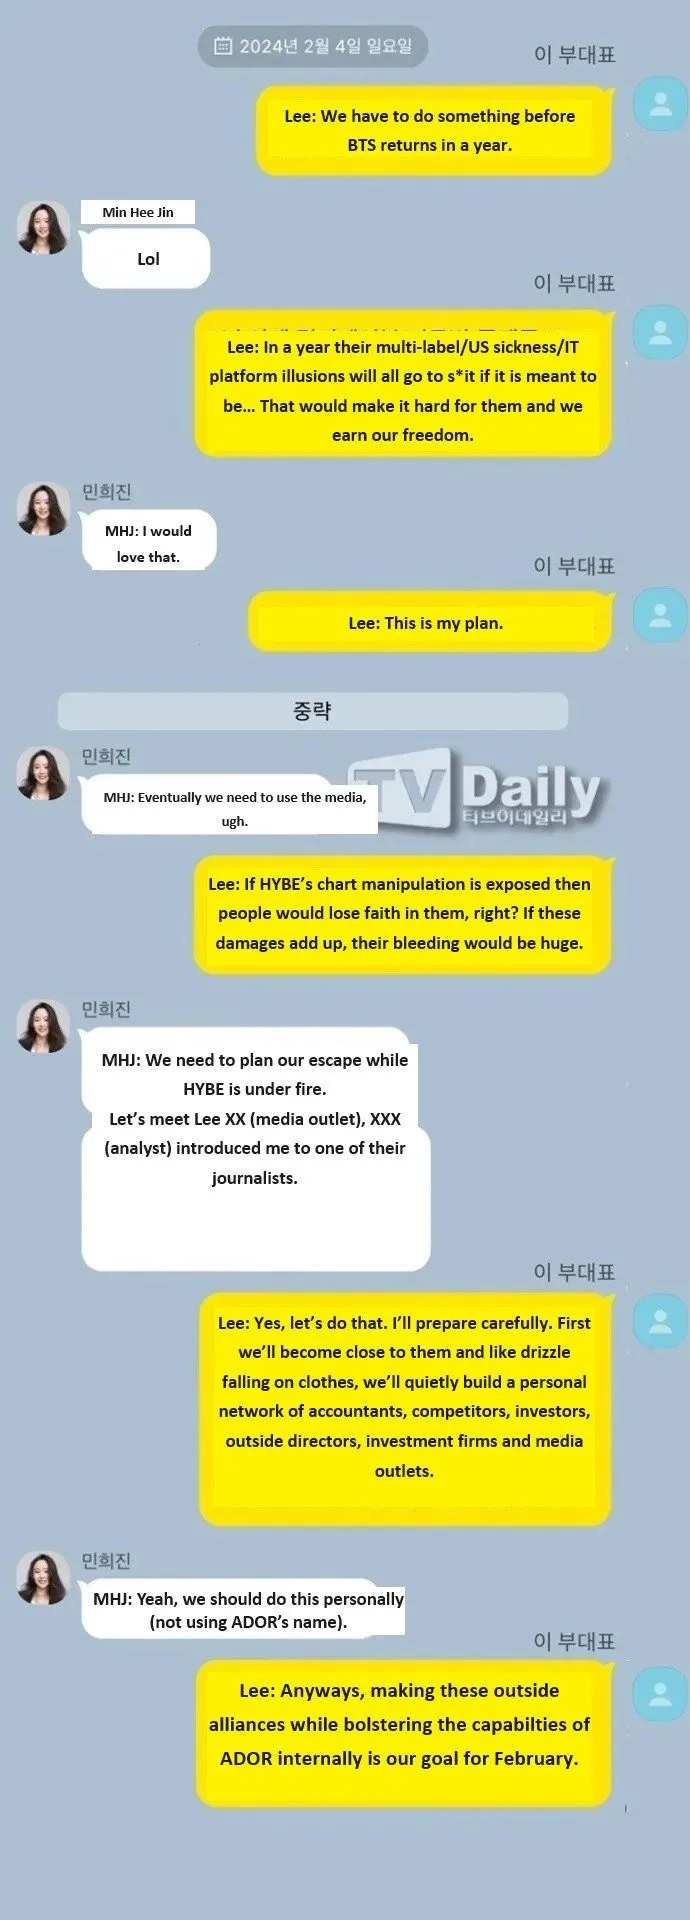 Texts Reveal ADOR's Min Hee-jin and VP's Strategy to Challenge HYBE's Control